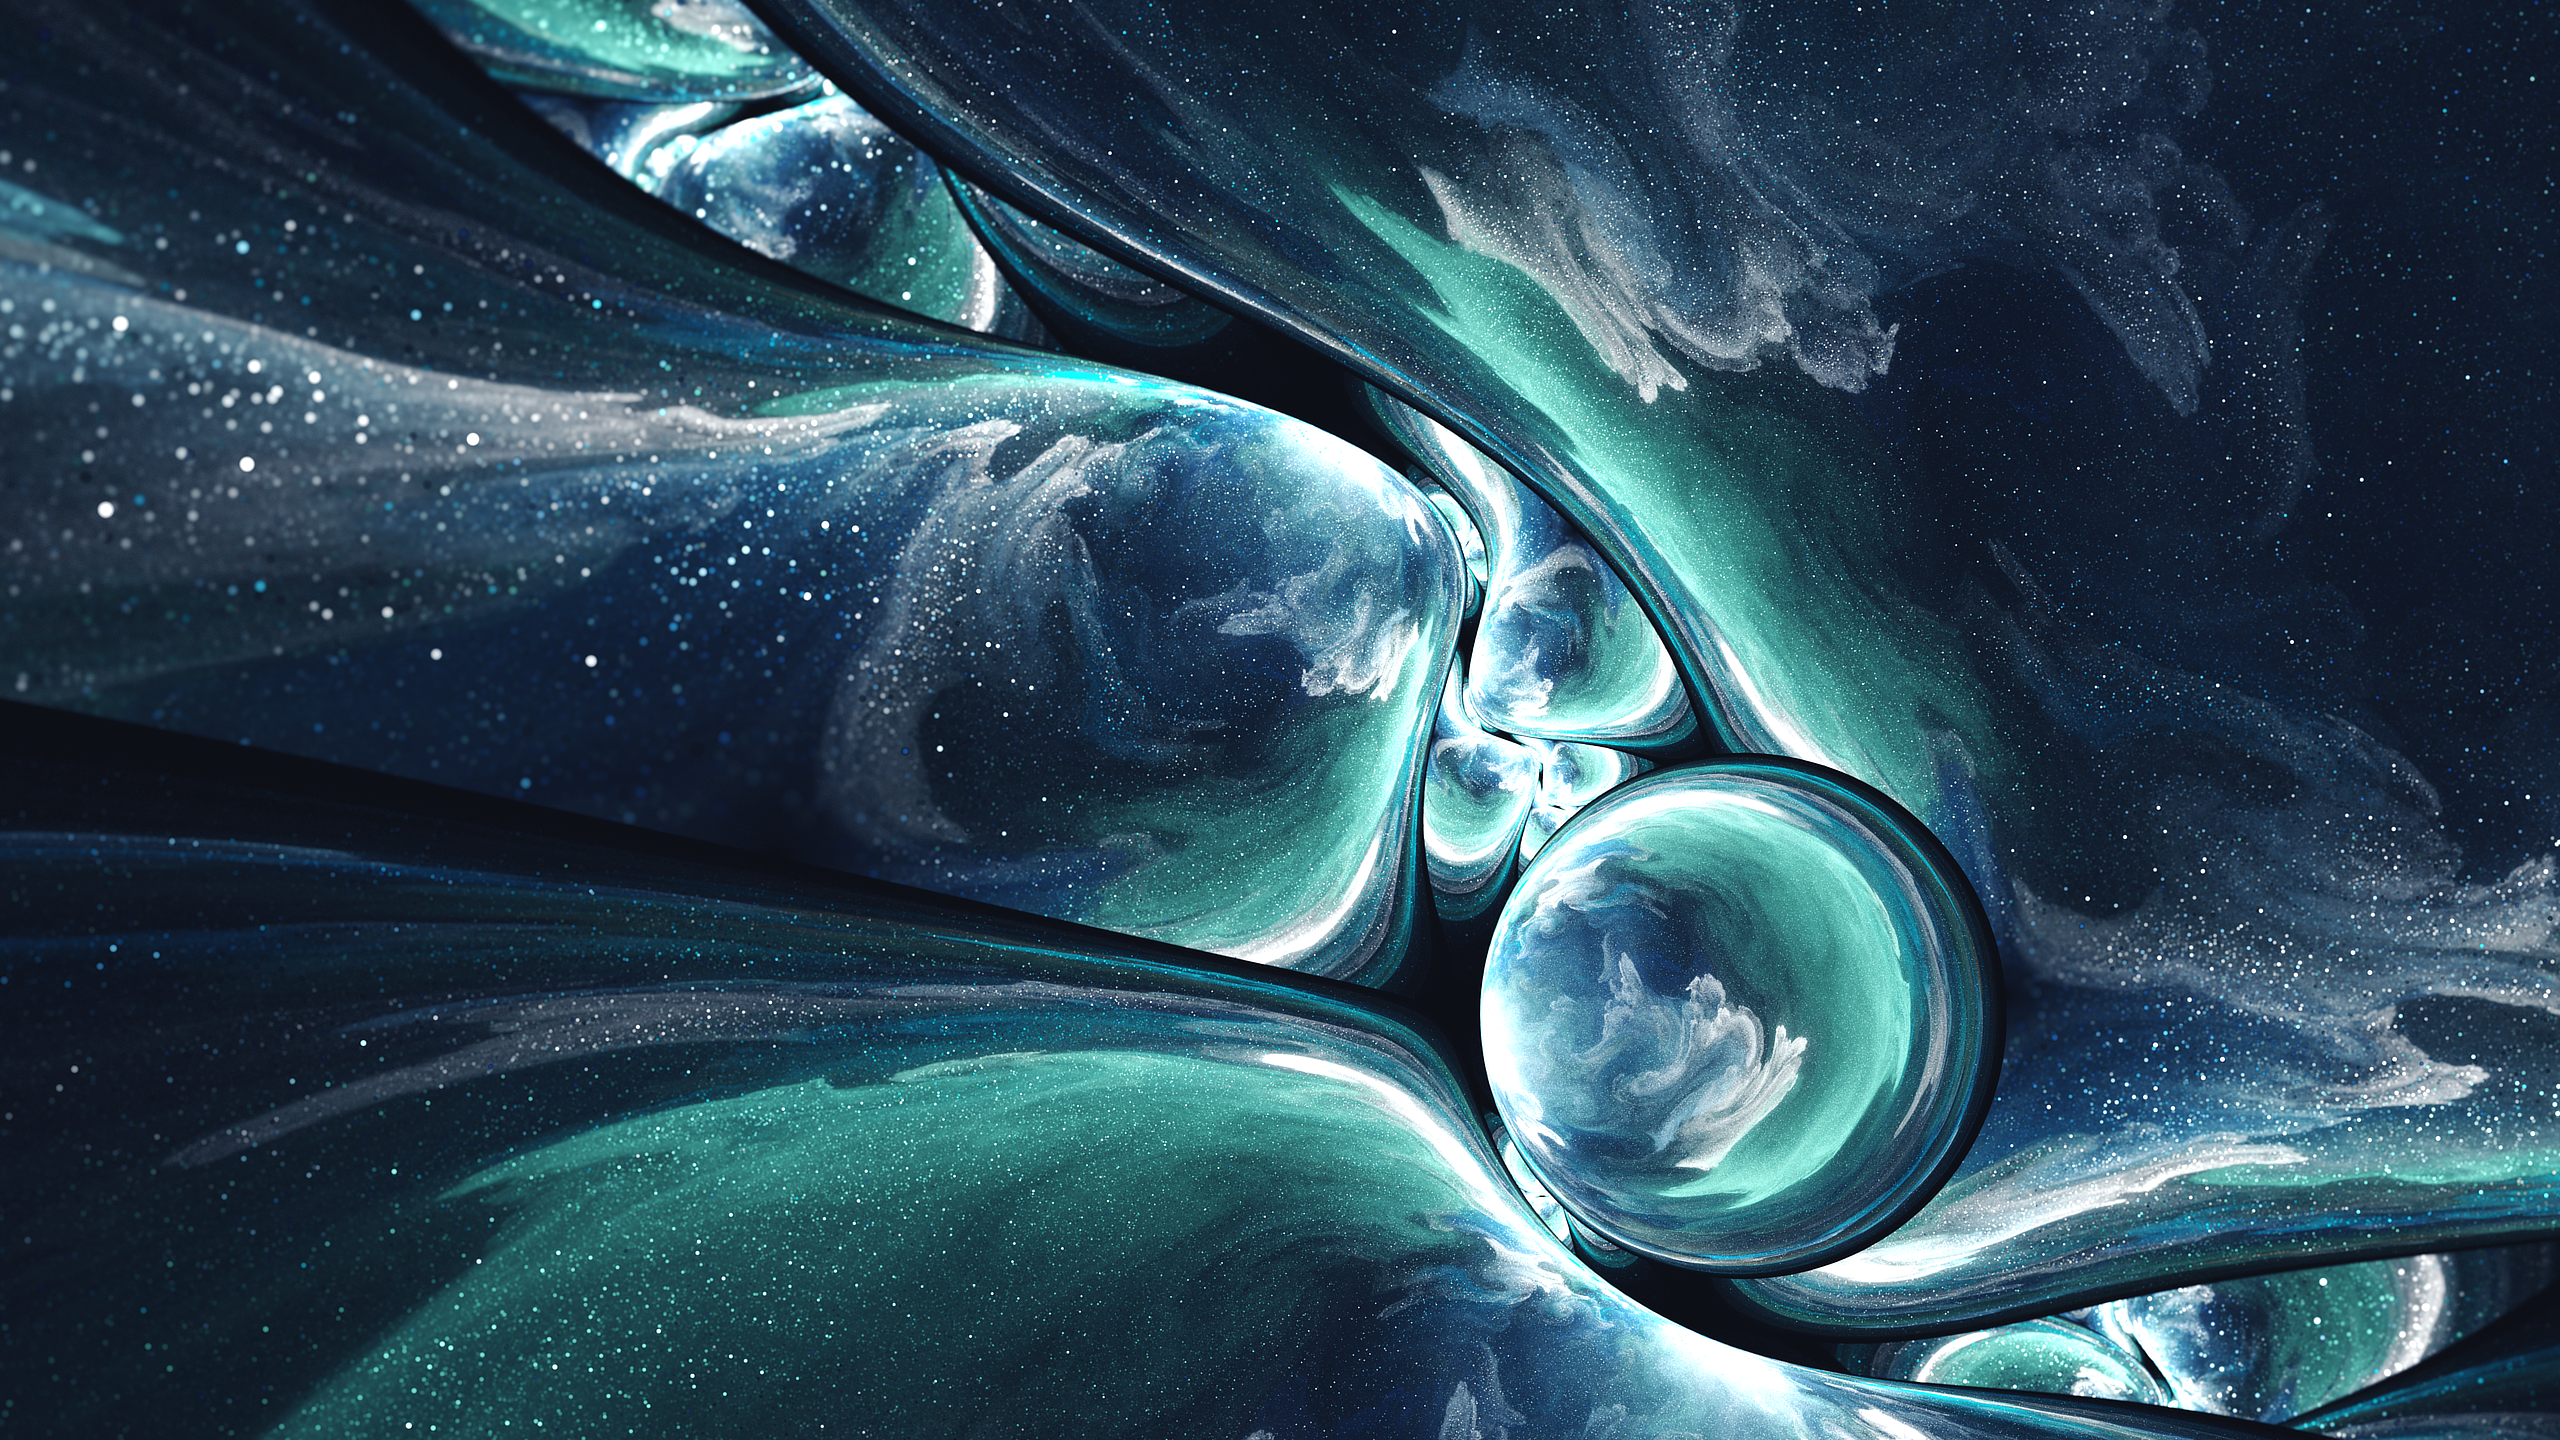 General 2560x1440 fractal abstract shapes digital art space art turquoise blue space